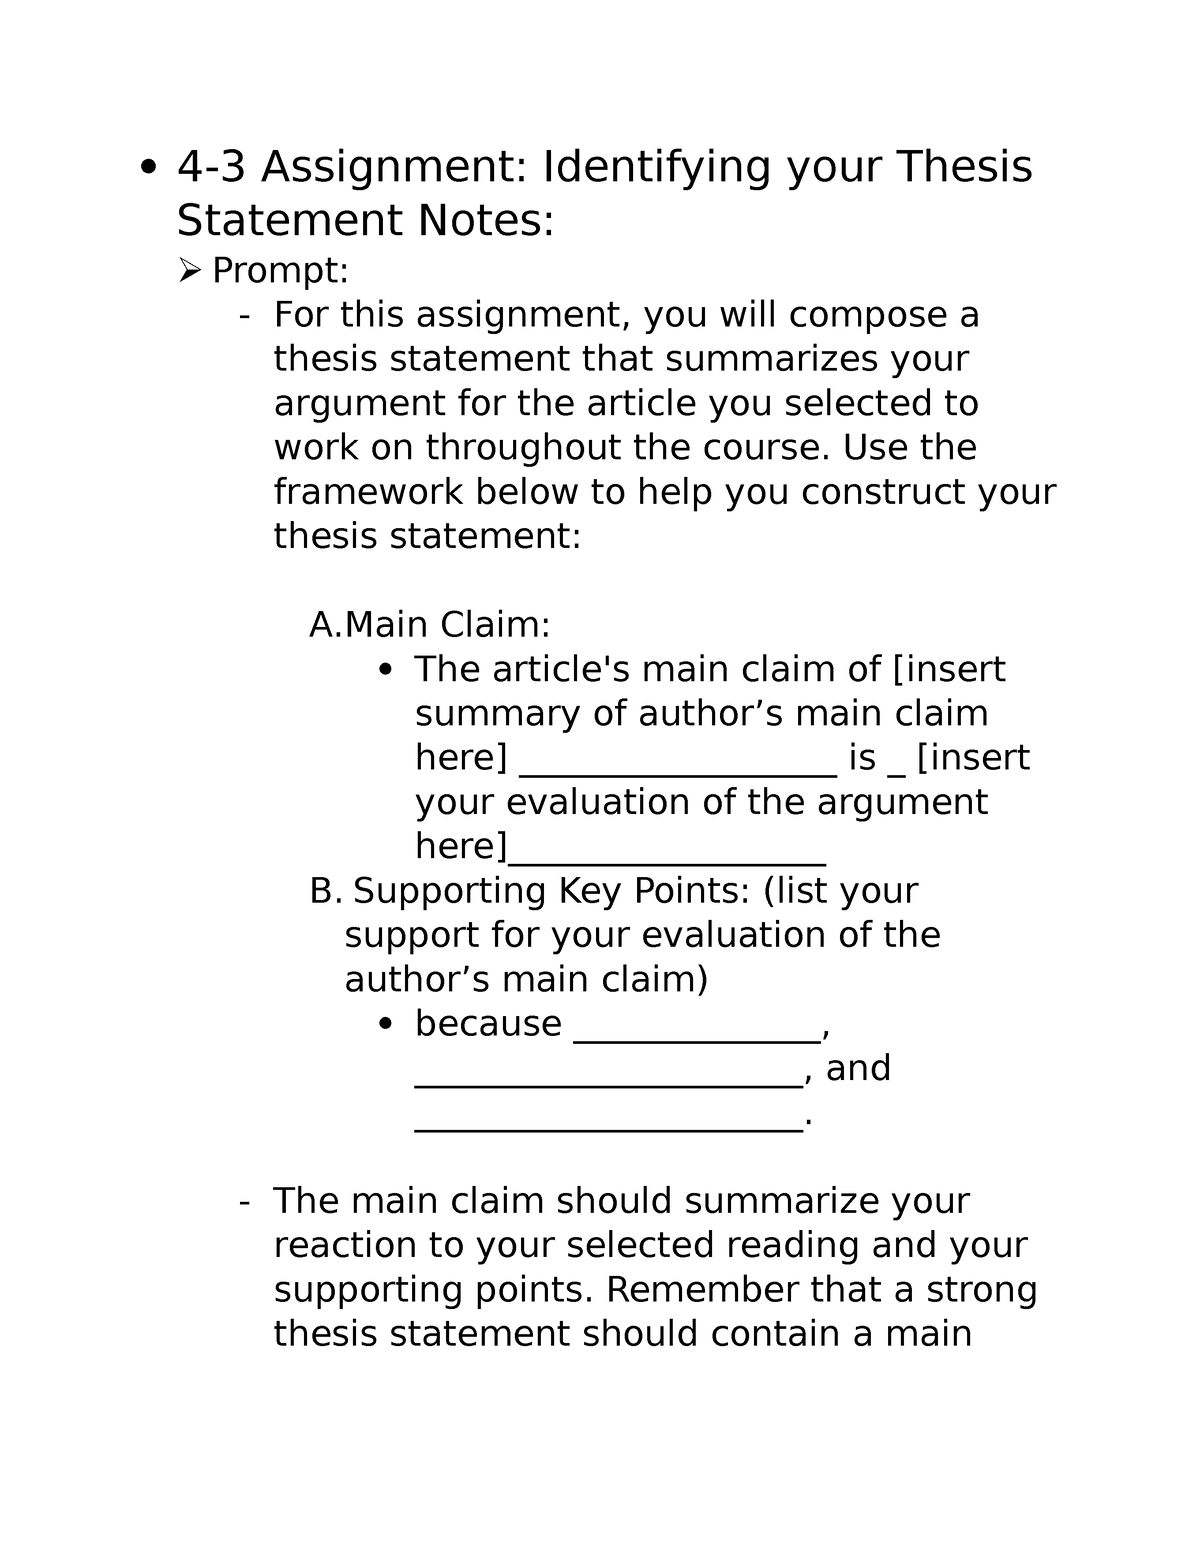 assignment assignment identifying your thesis statement (graded)